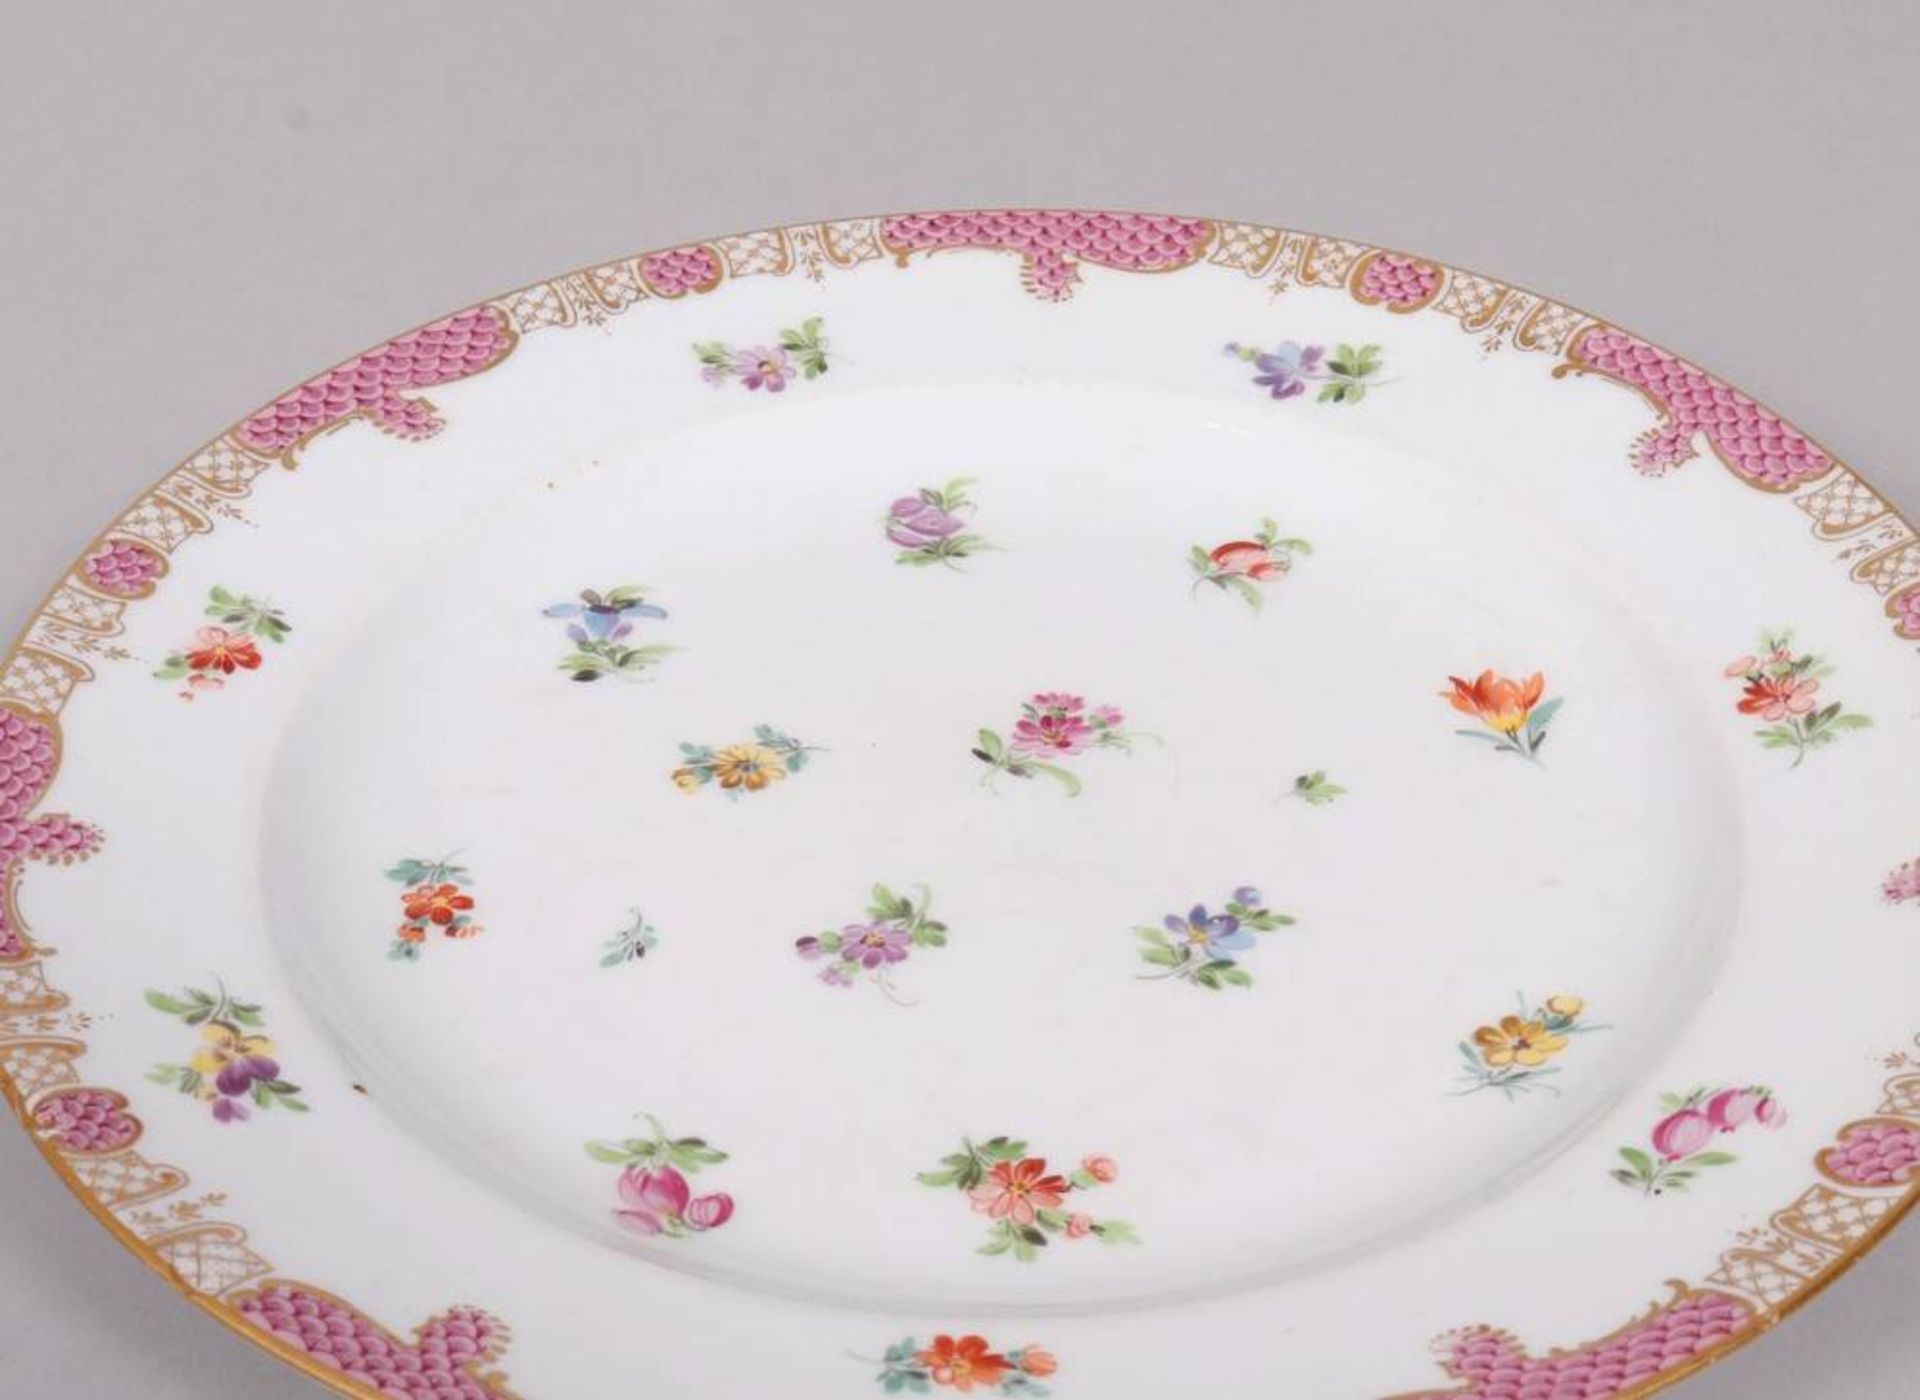 Plate, Meissen, early 19th C., "Streublümchen" decor with purple scale pattern - Image 2 of 6